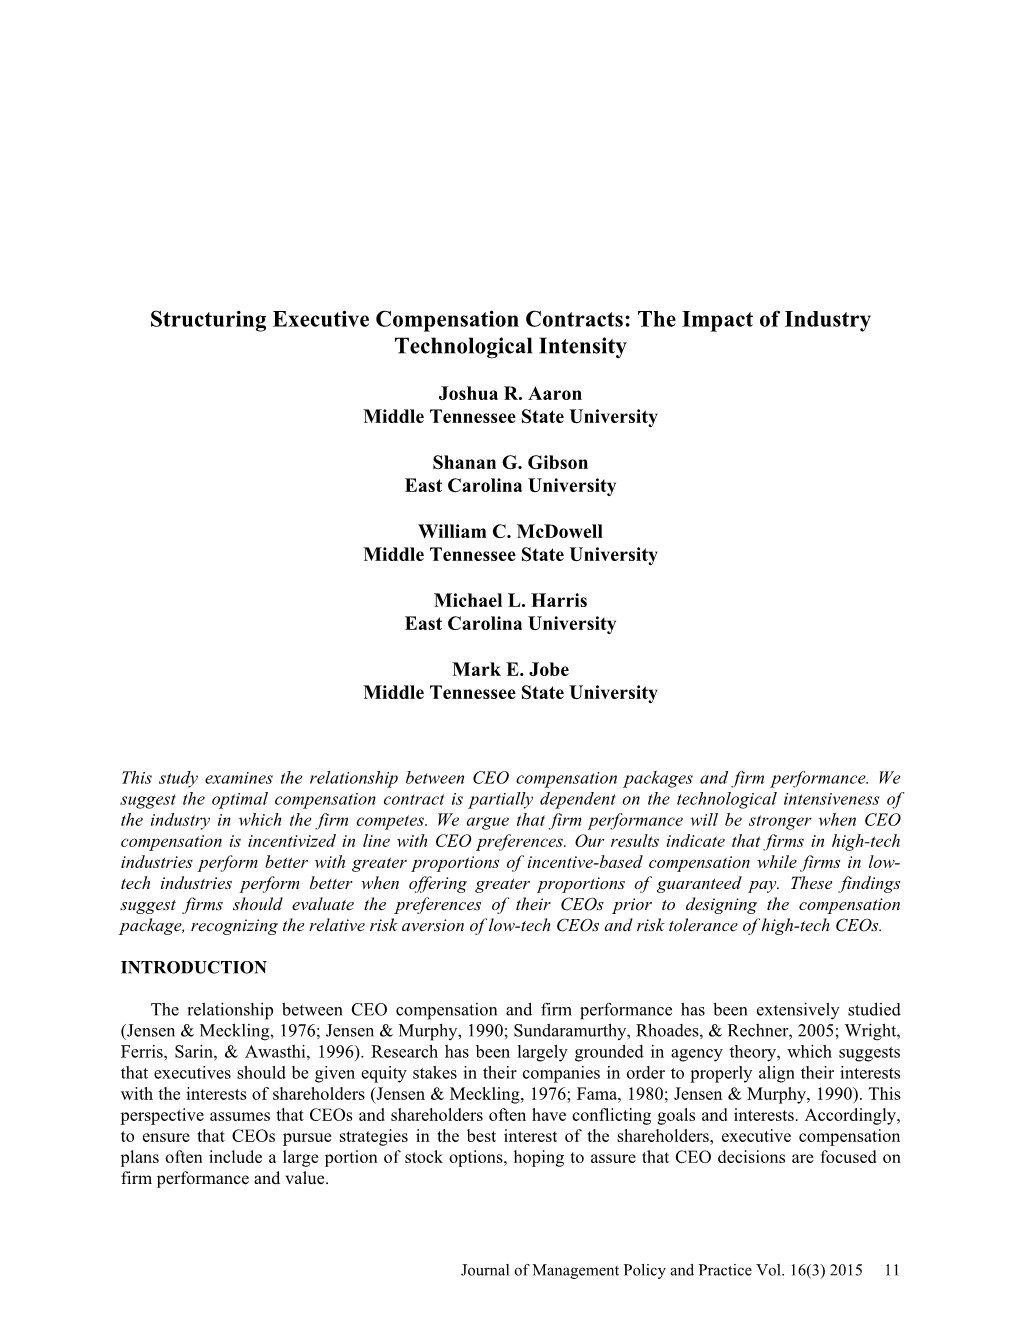 Structuring Executive Compensation Contracts: the Impact of Industry Technological Intensity